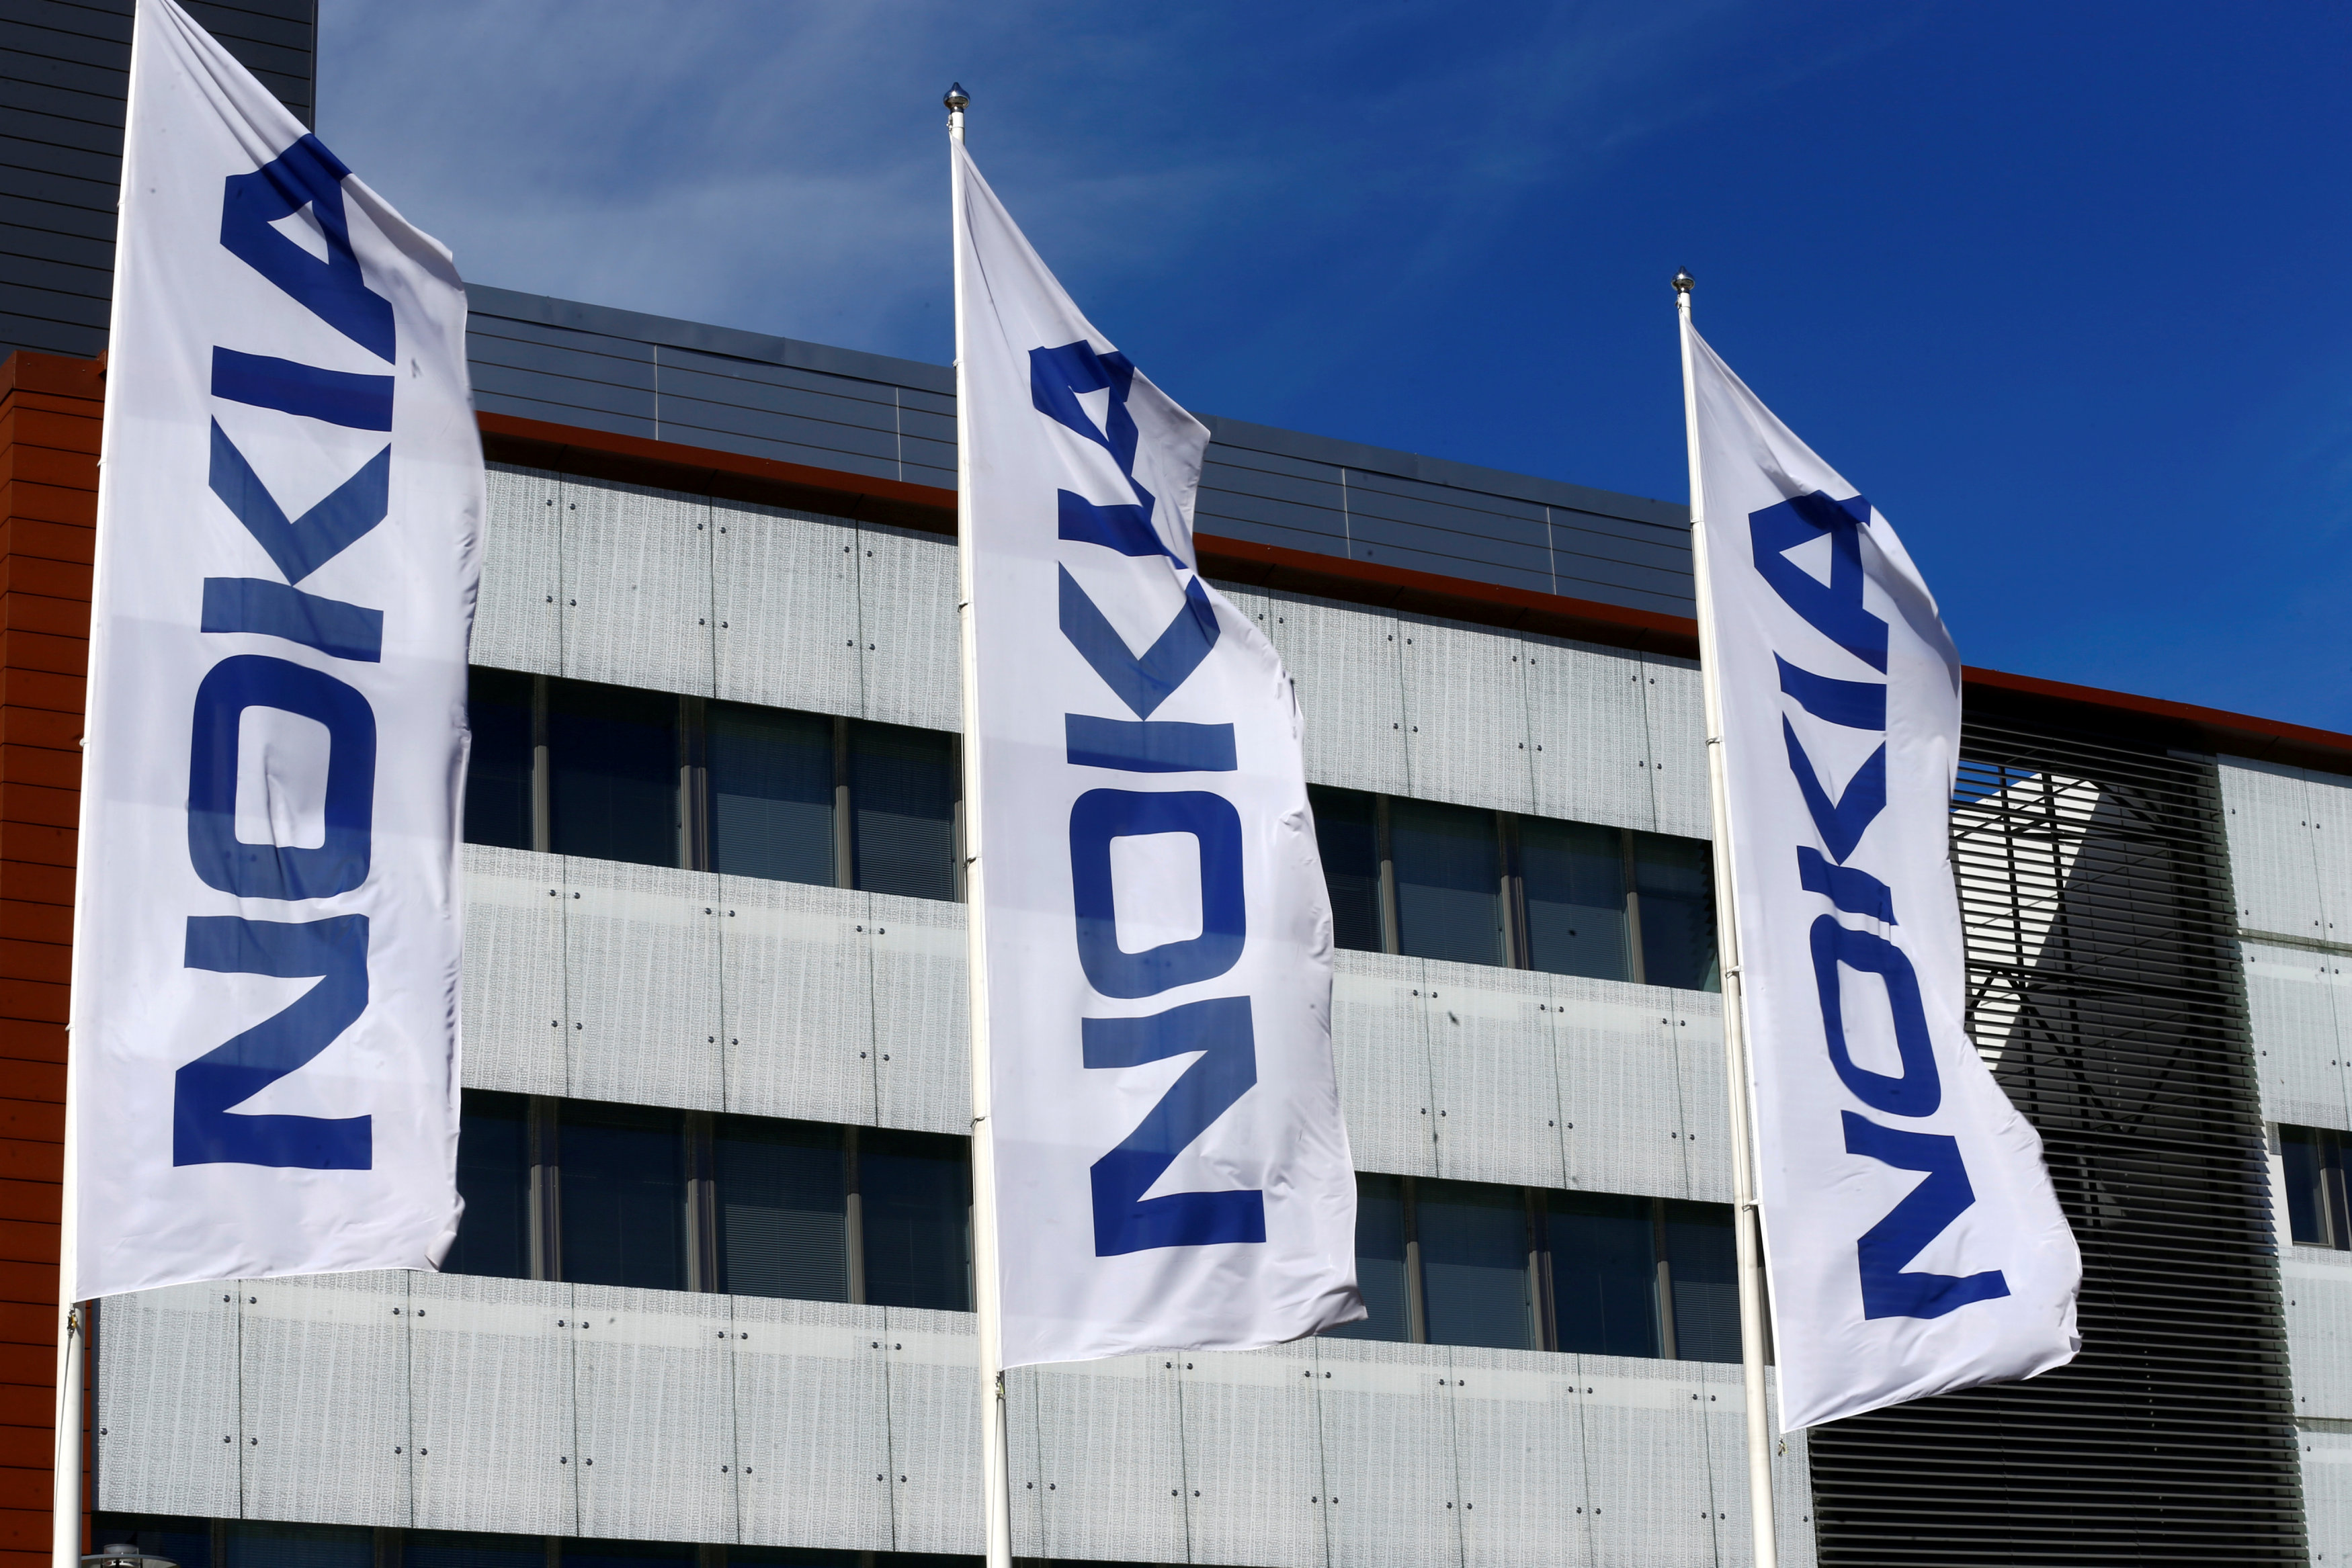 Nokia introduces smartphone with PureDisplay screen technology